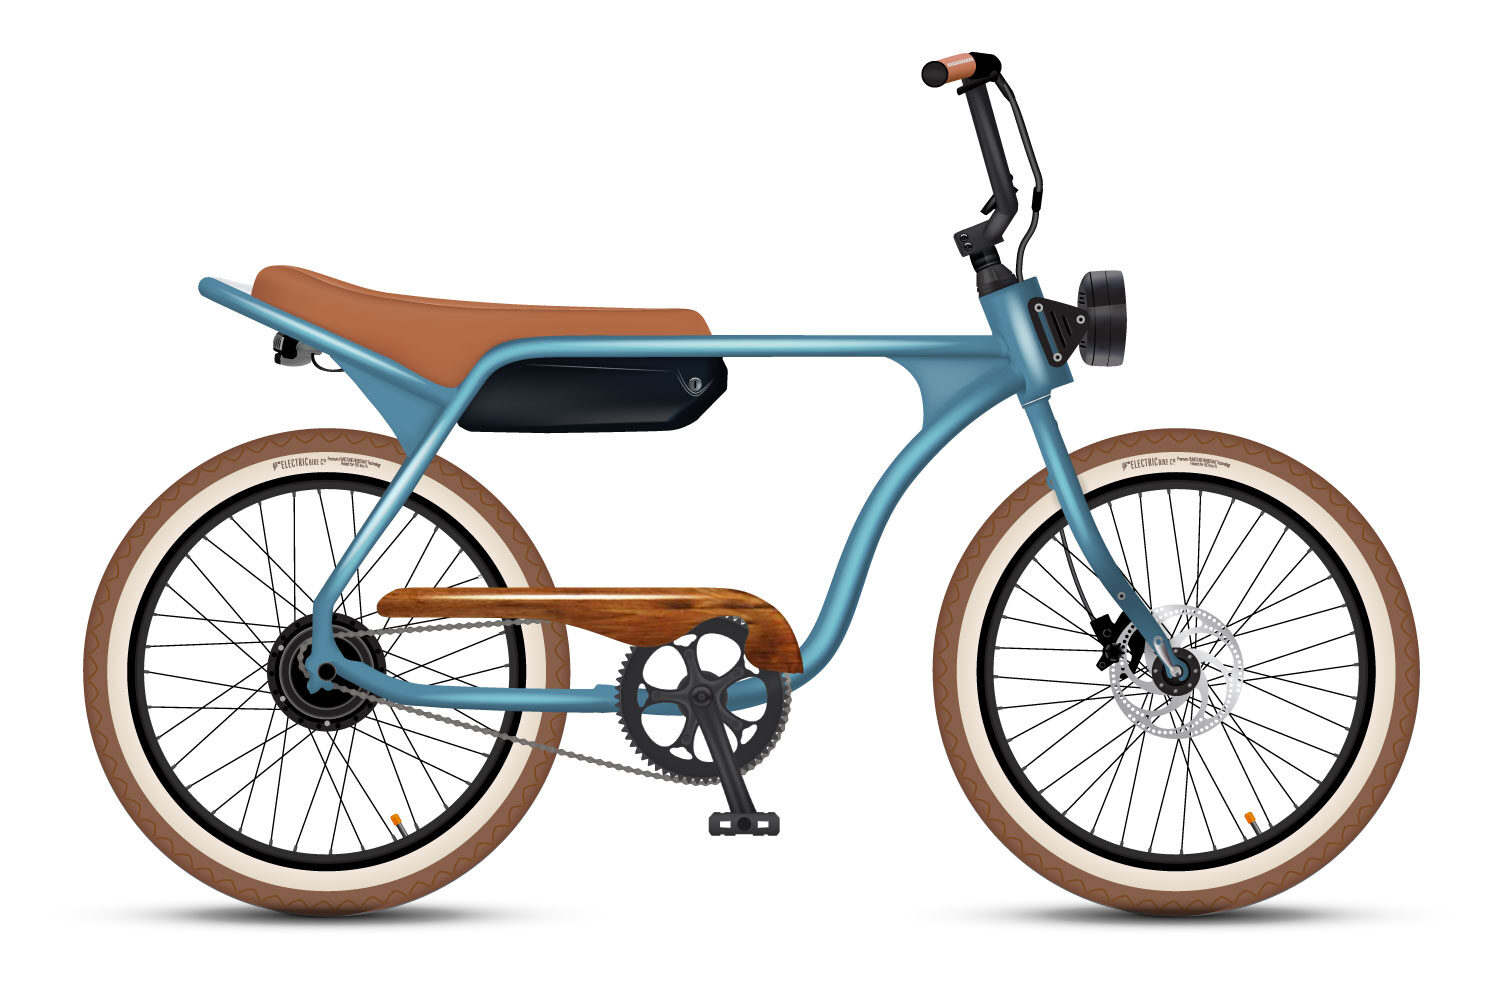 INTRODUCTORY OFFER New moped style eBike thats American Made! $1199